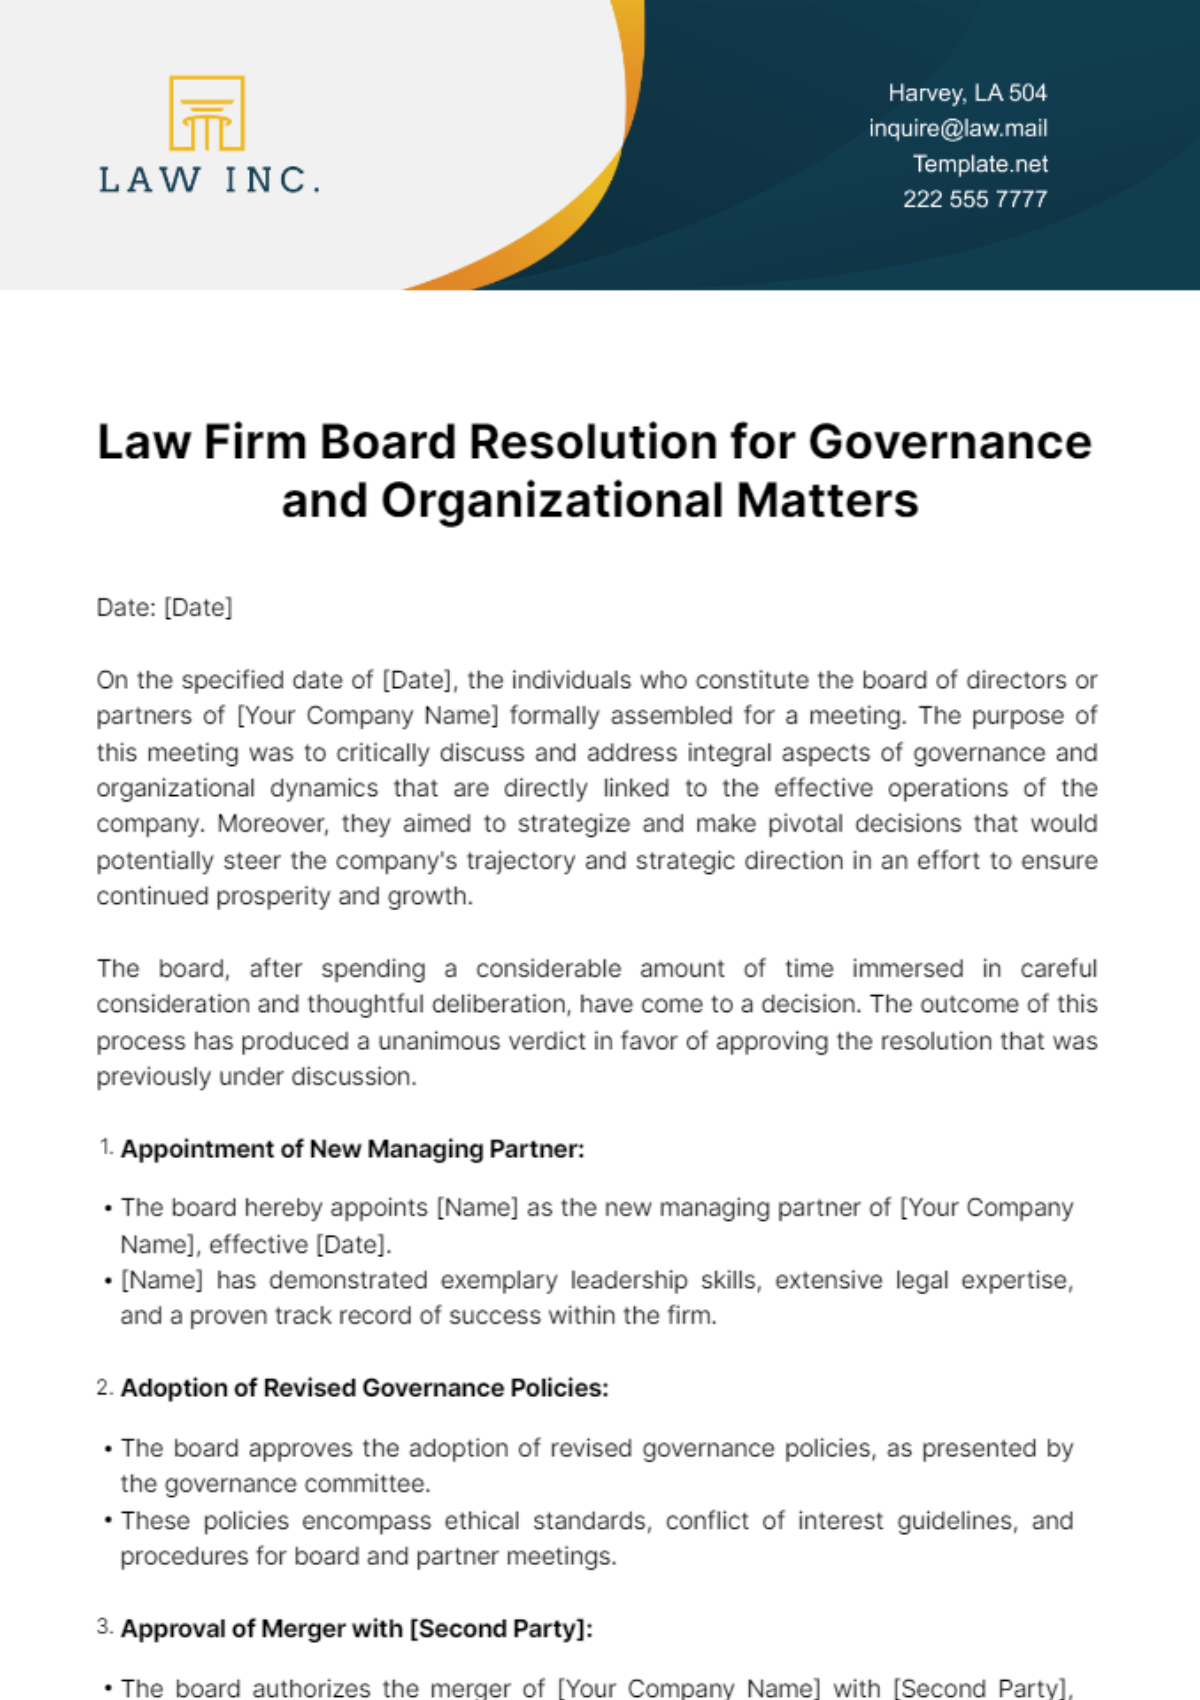 Free Law Firm Board Resolution for Governance and Organizational Matters